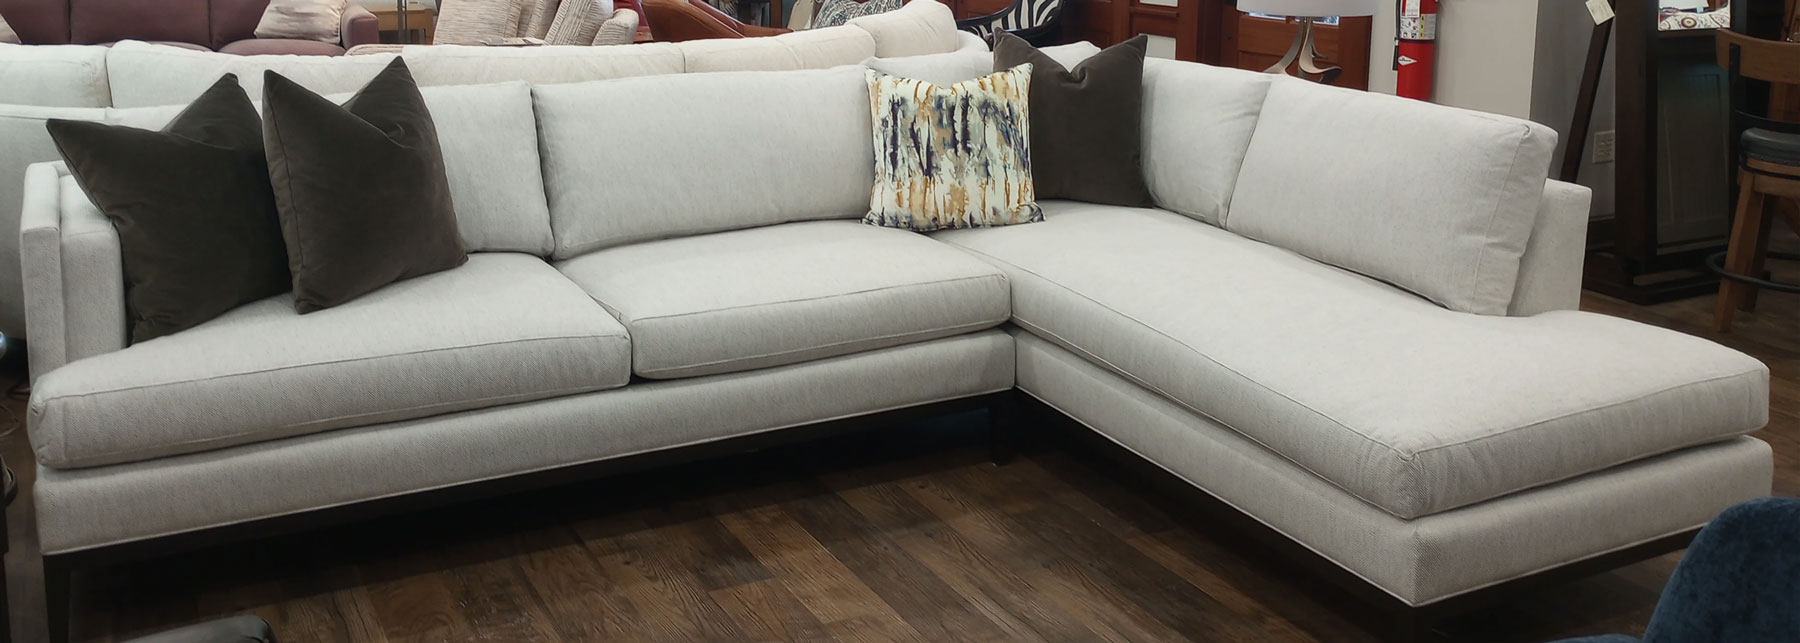 Wesley Hall Peretti Sectional in Omega Flint Fabric